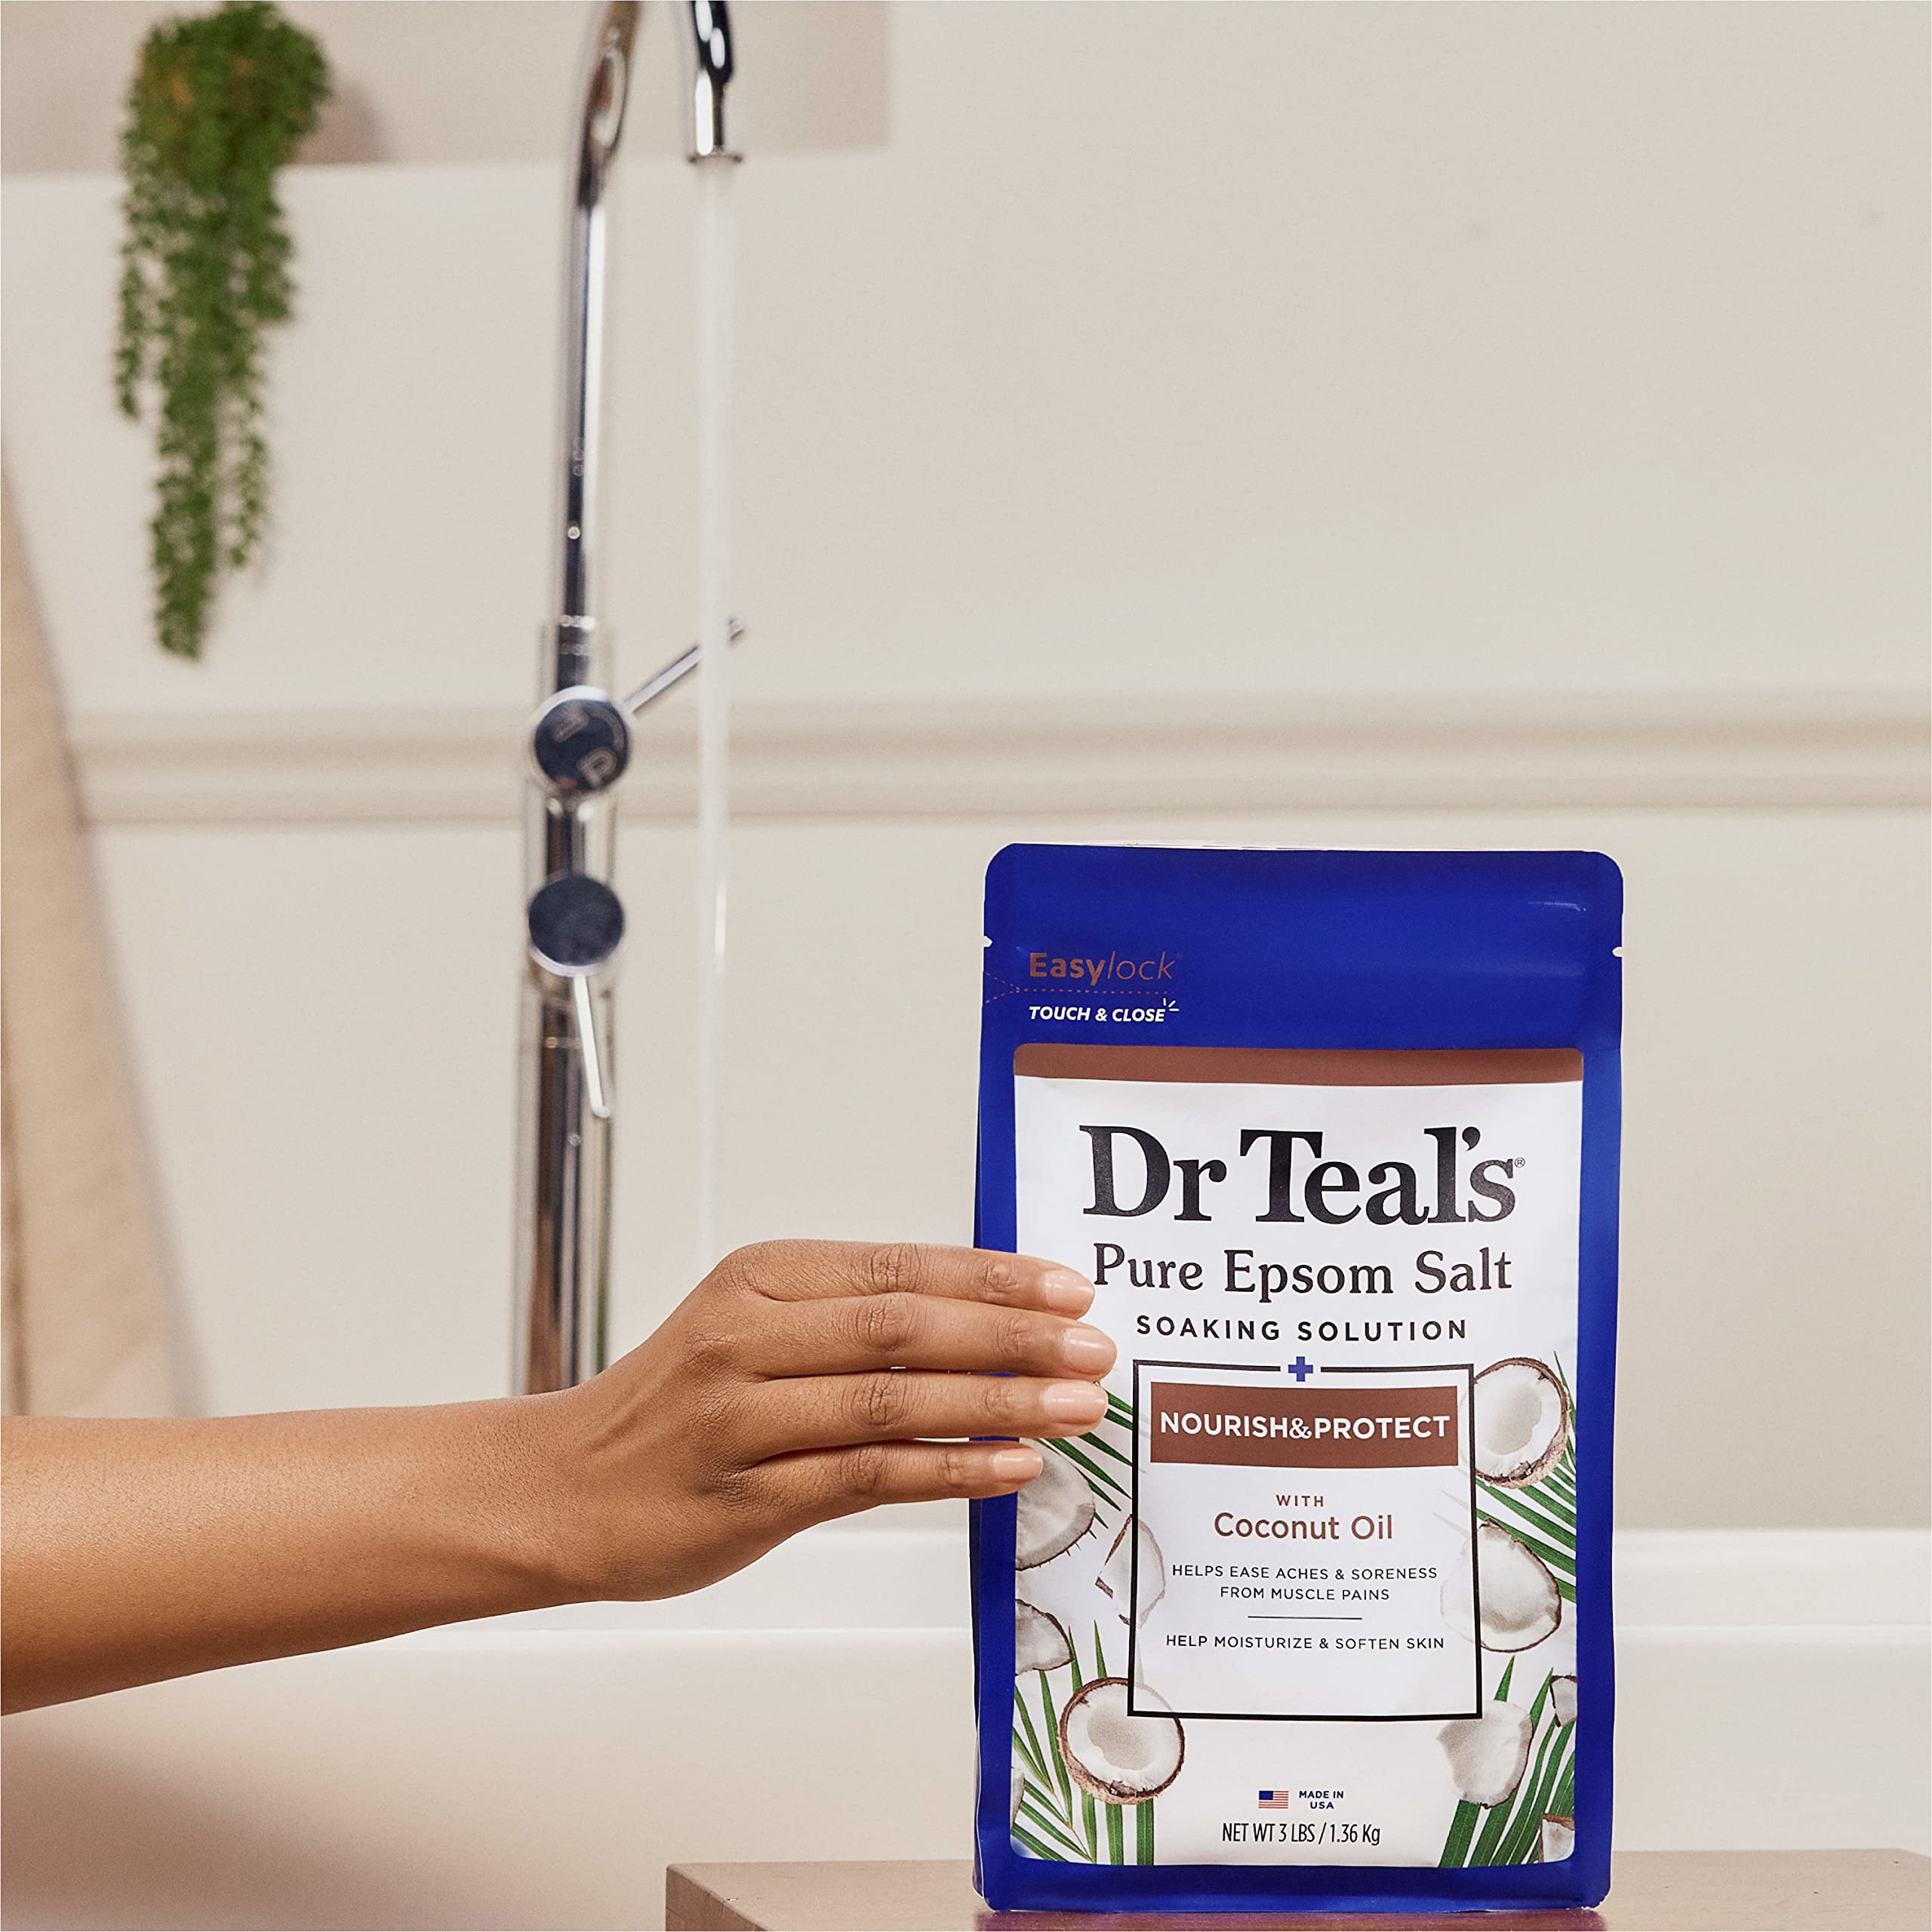 Dr Teal's Pure Epsom Salt Soak, Nourish & Protect with Coconut Oil, 3 lbs (Packaging May Vary)